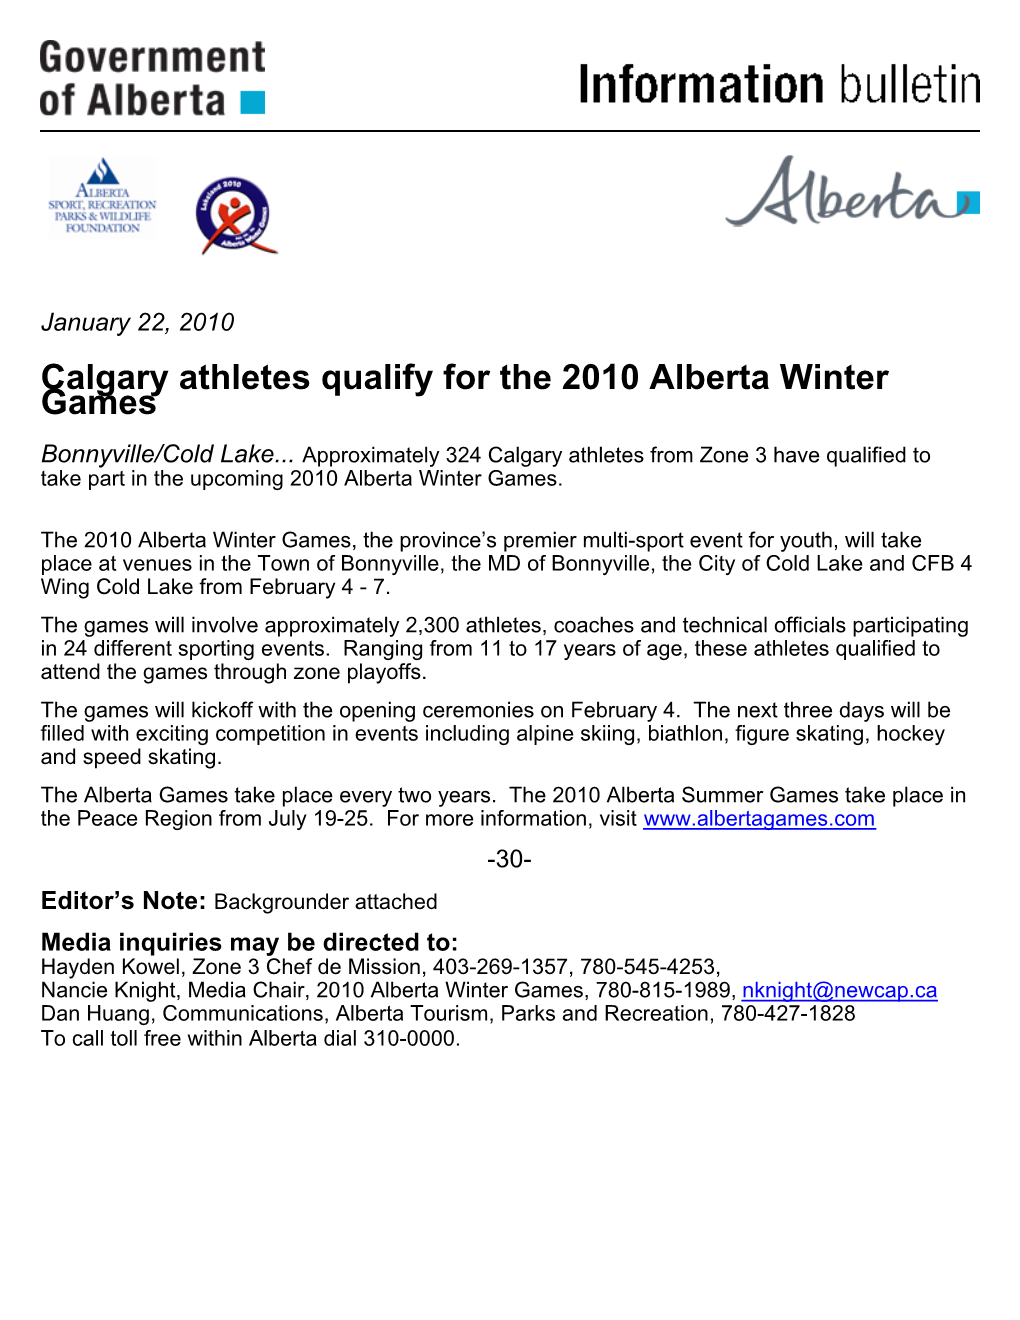 Calgary Athletes Qualify for the 2010 Alberta Winter Games